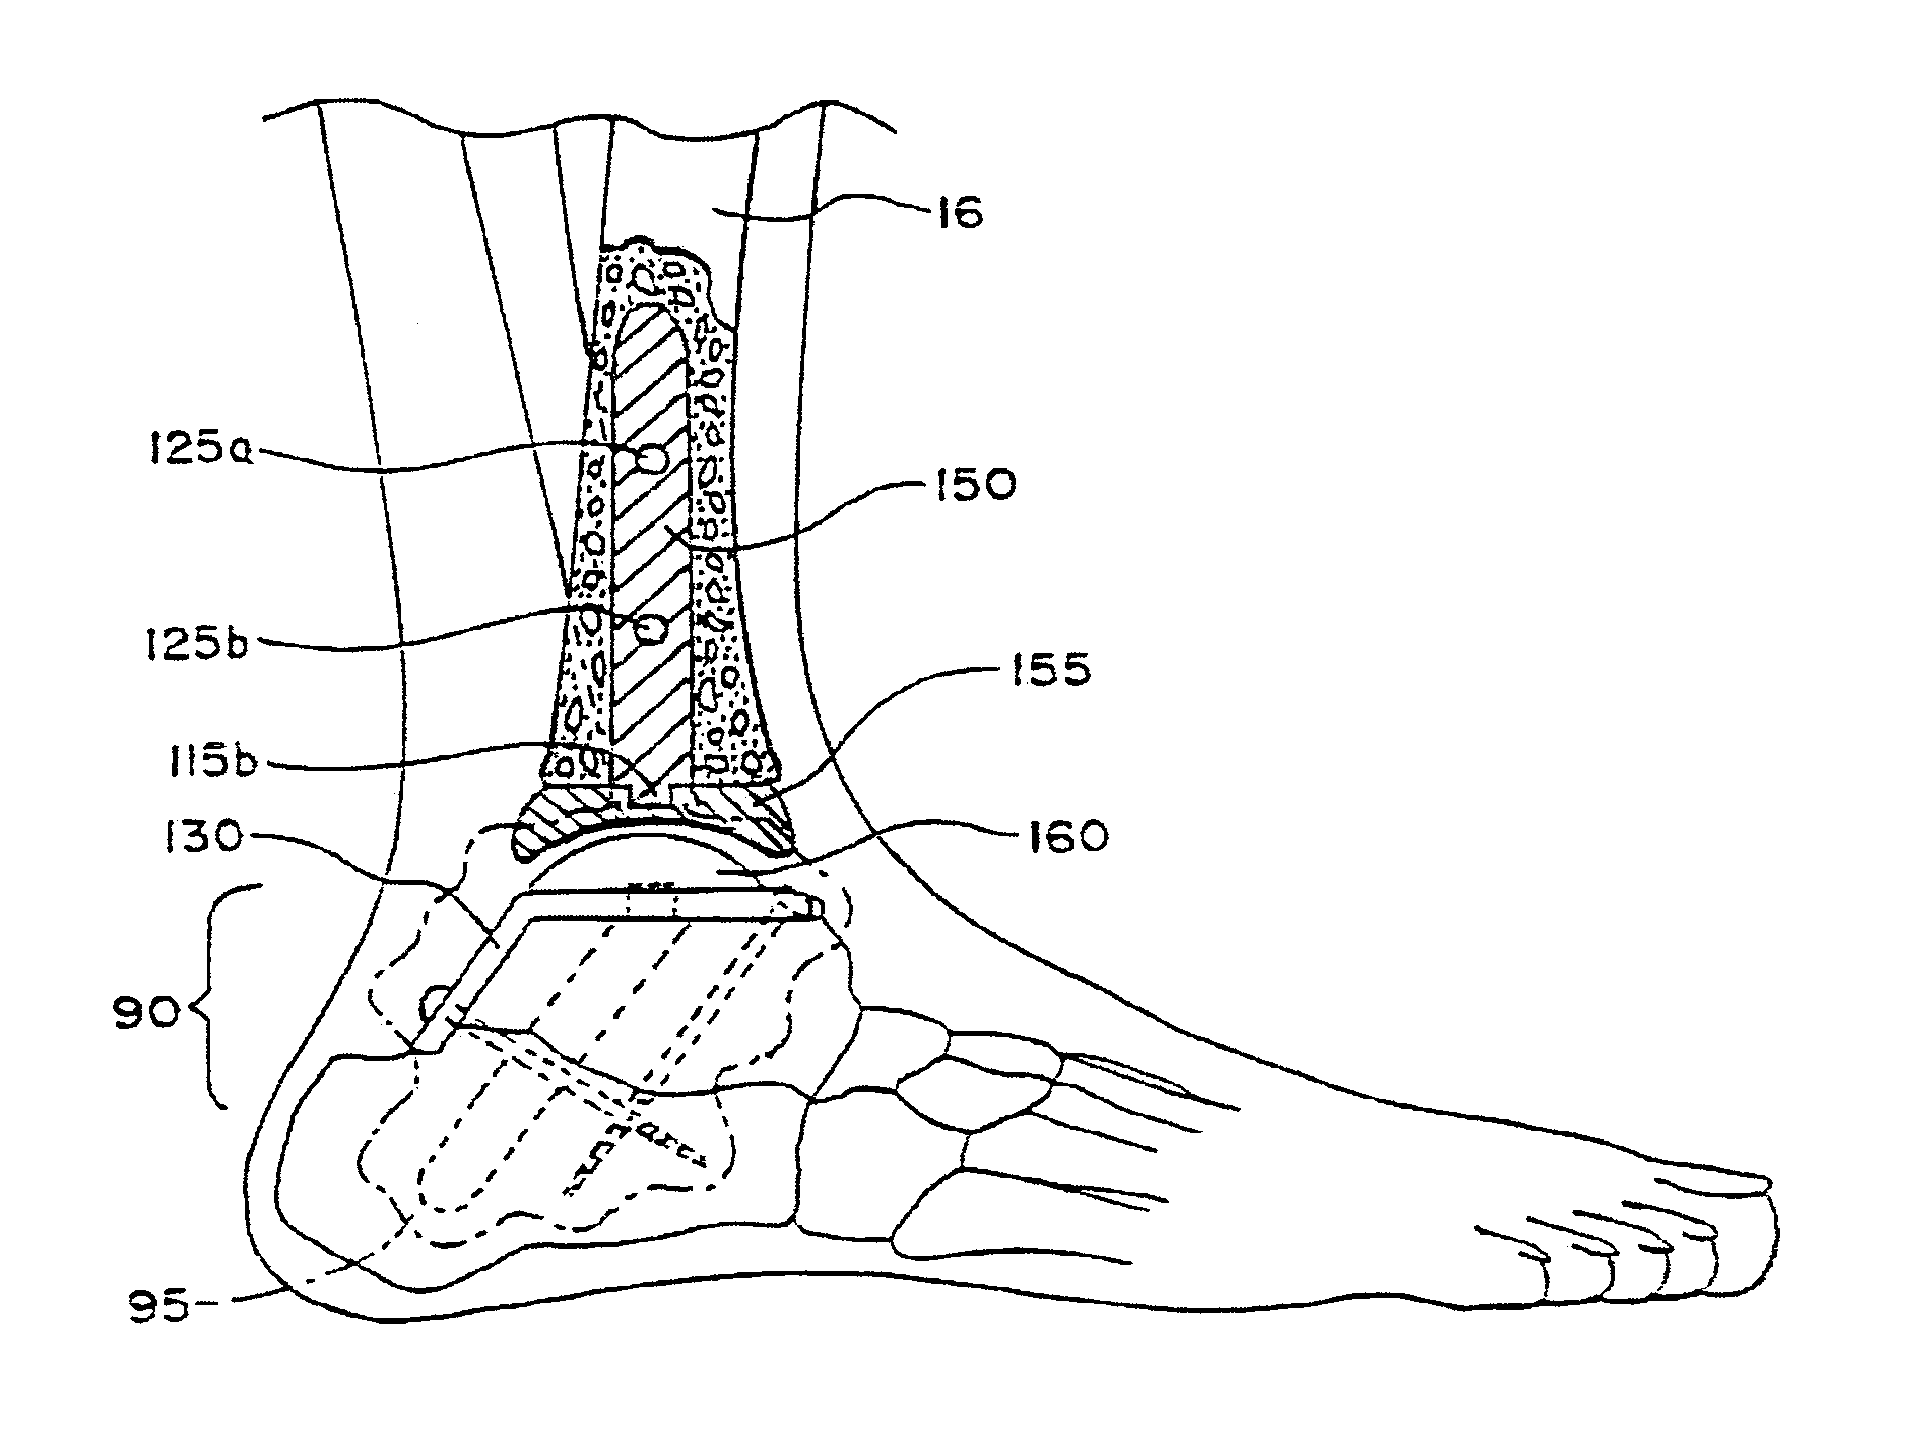 Systems and methods for installing ankle replacement prostheses